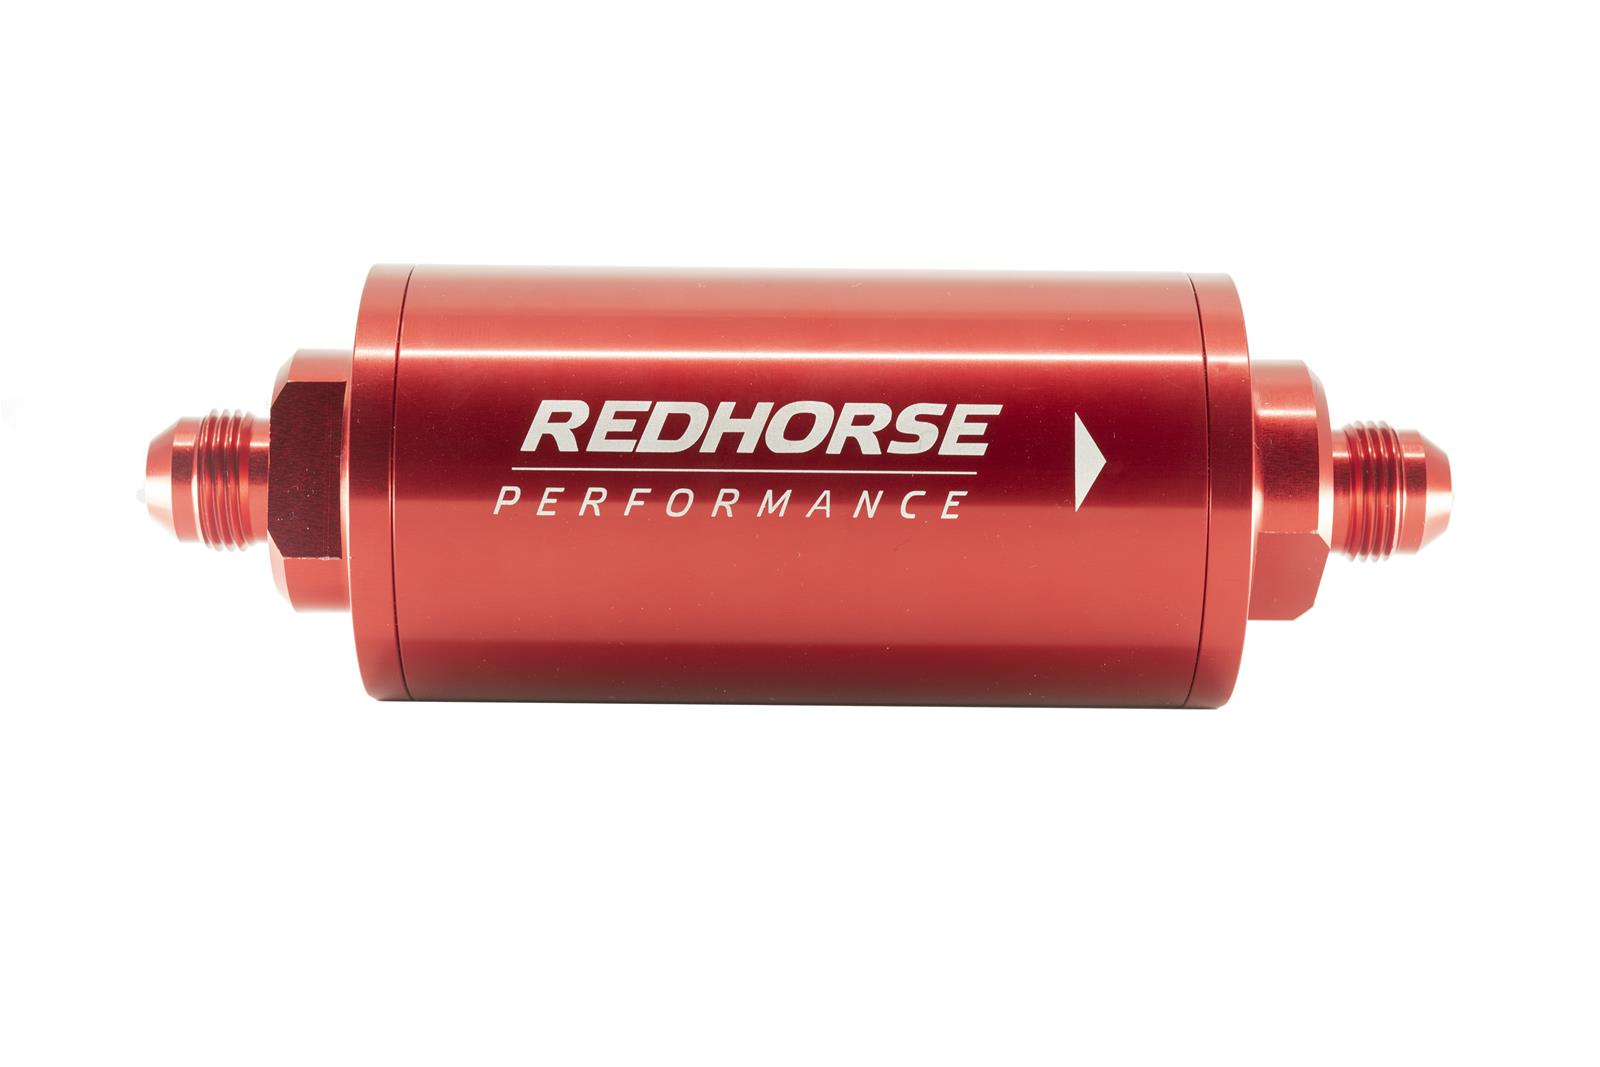 Redhorse Performance 4651-08-3-100 6in Cylindrical In-Line Race Fuel Filter w/ 100 Micron S.S. element - 08 AN